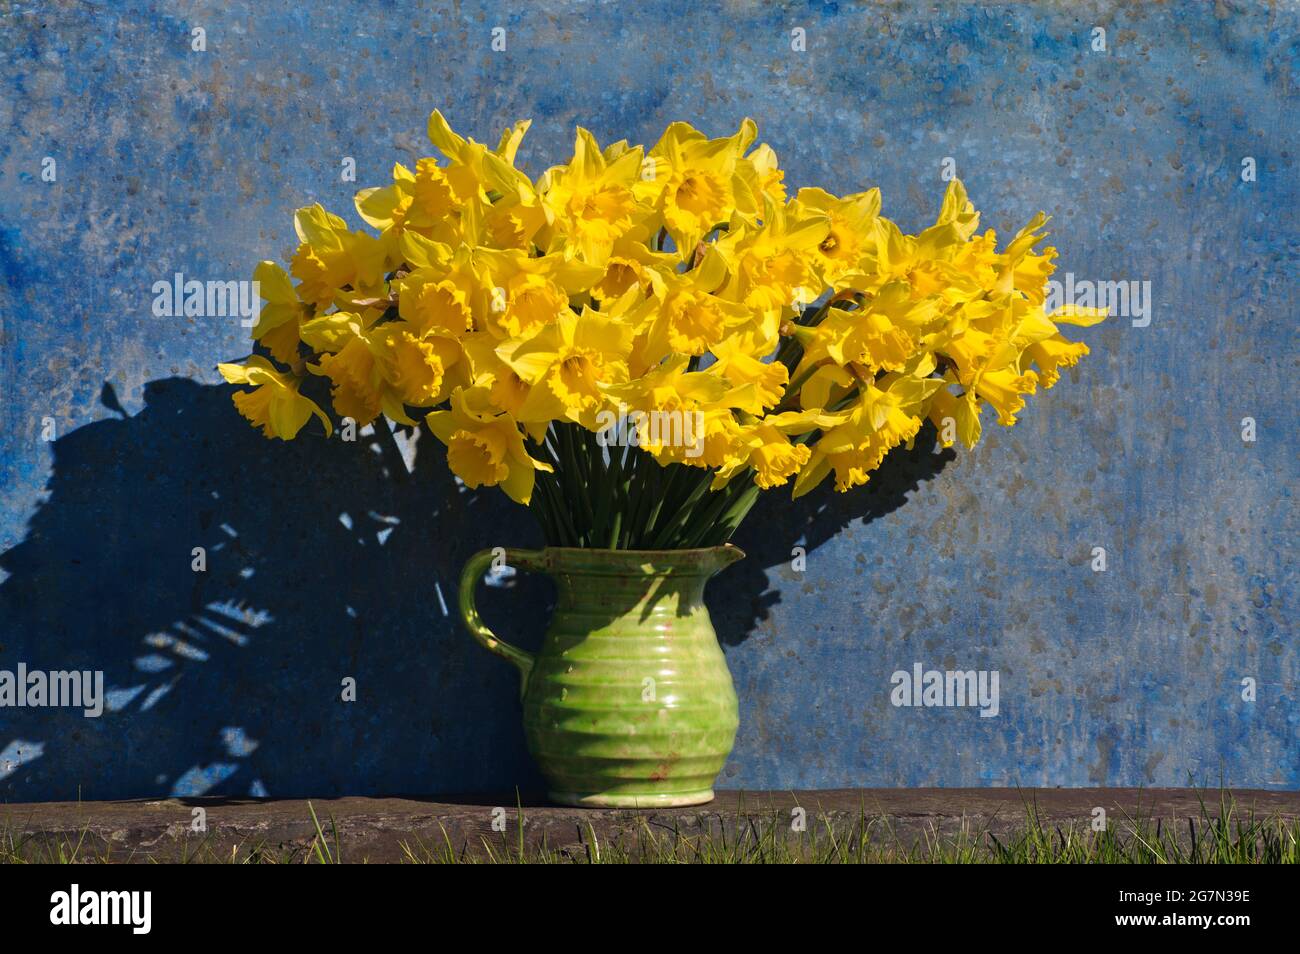 A large bunch of homegrown daffodils in a green jug on a slate slab against a painted mottled blue background. Daffodils are the flowers associated wi Stock Photo